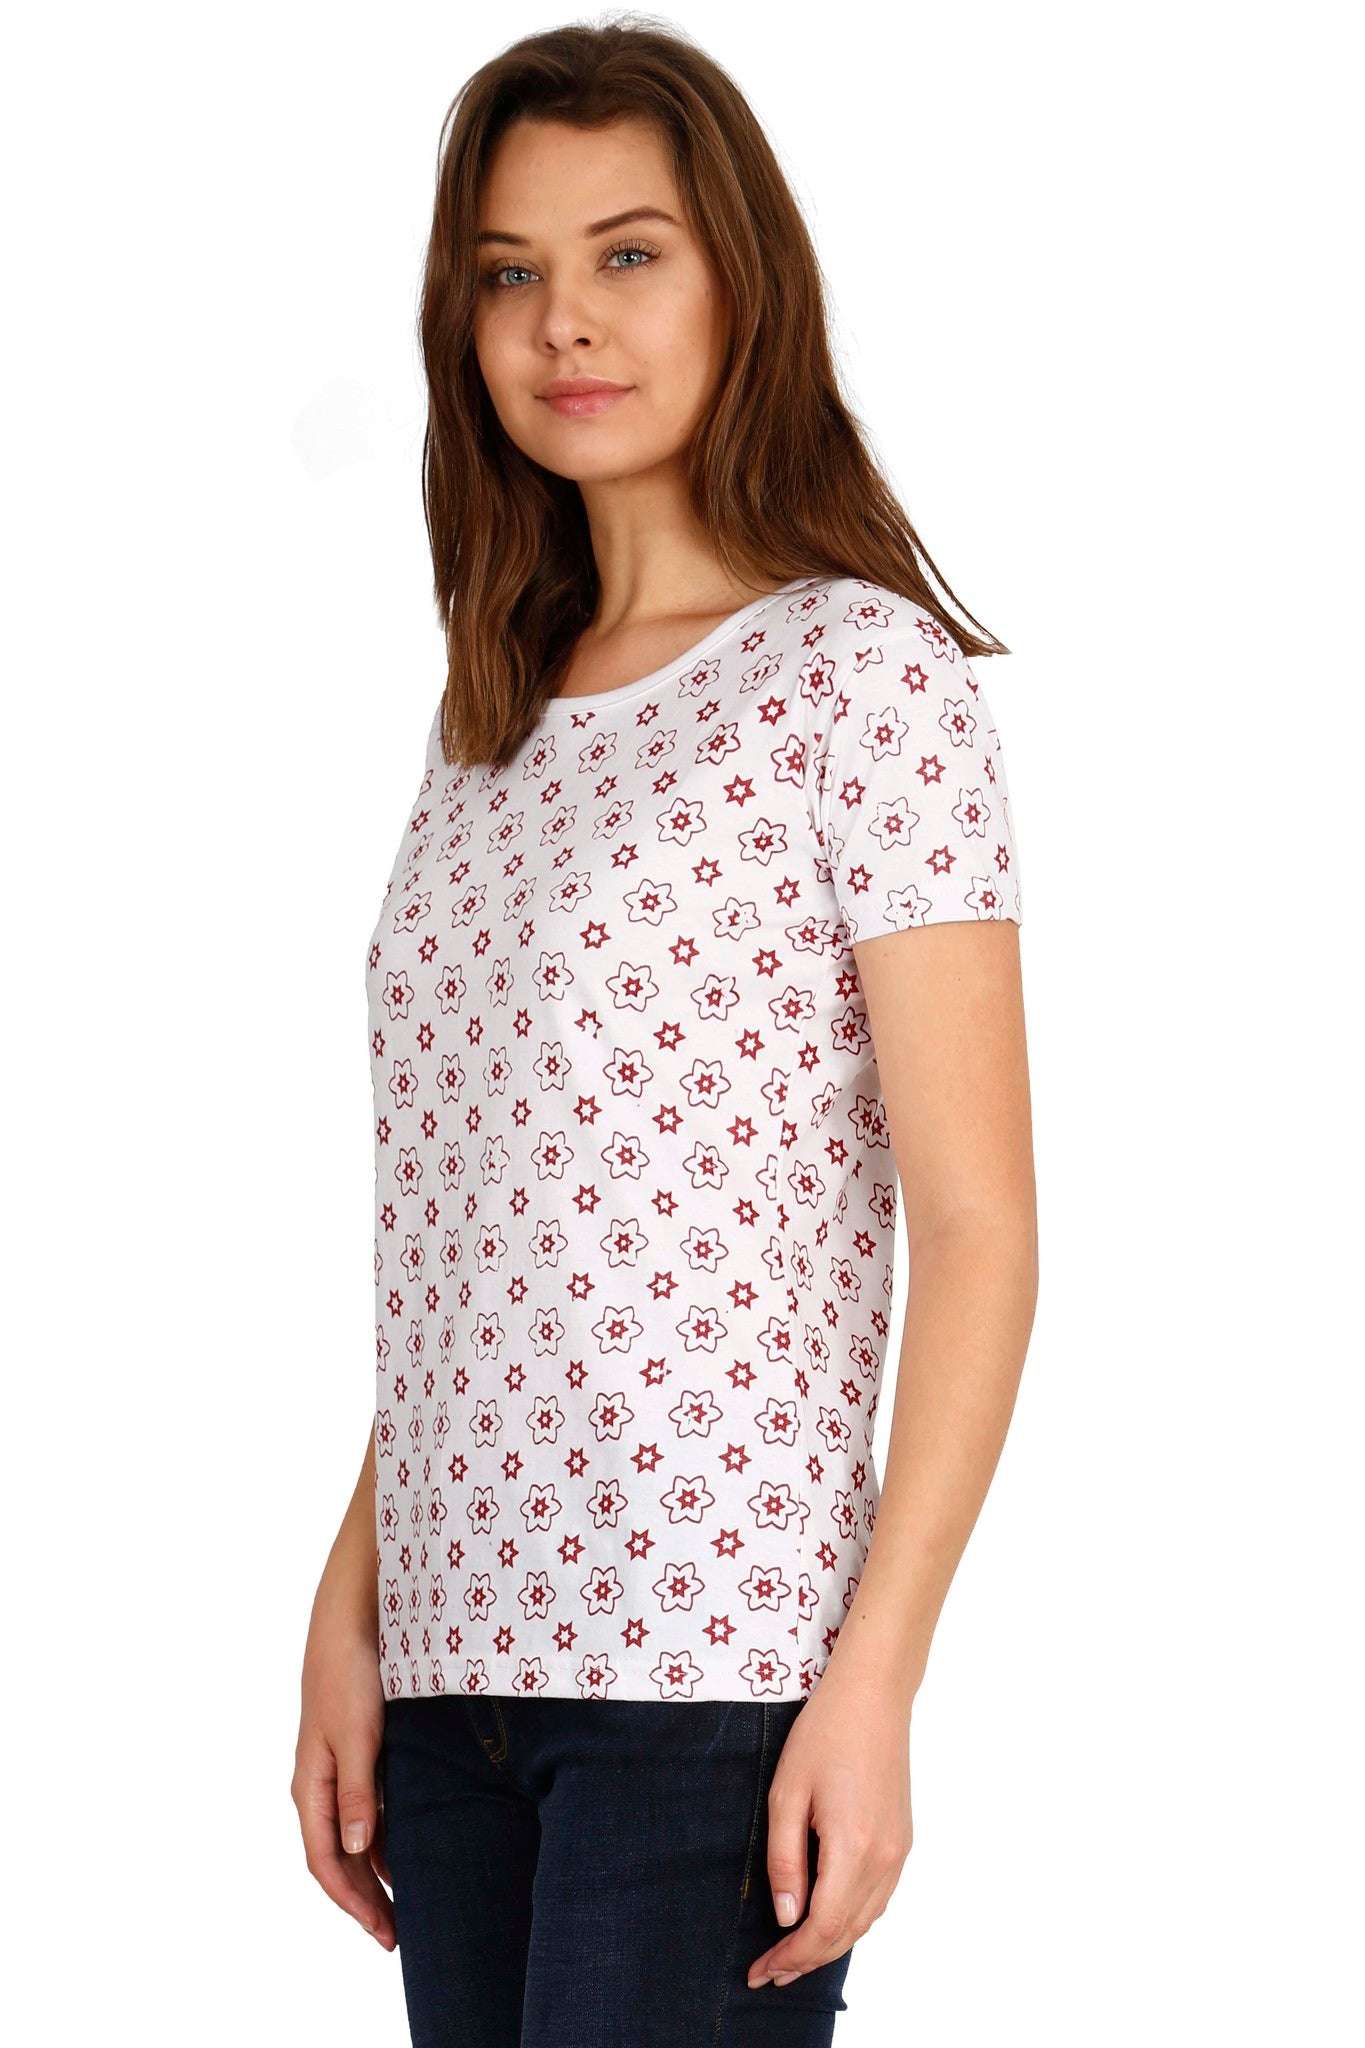 Women's Cotton Round Neck All Over Printed Half Sleeve T-Shirt